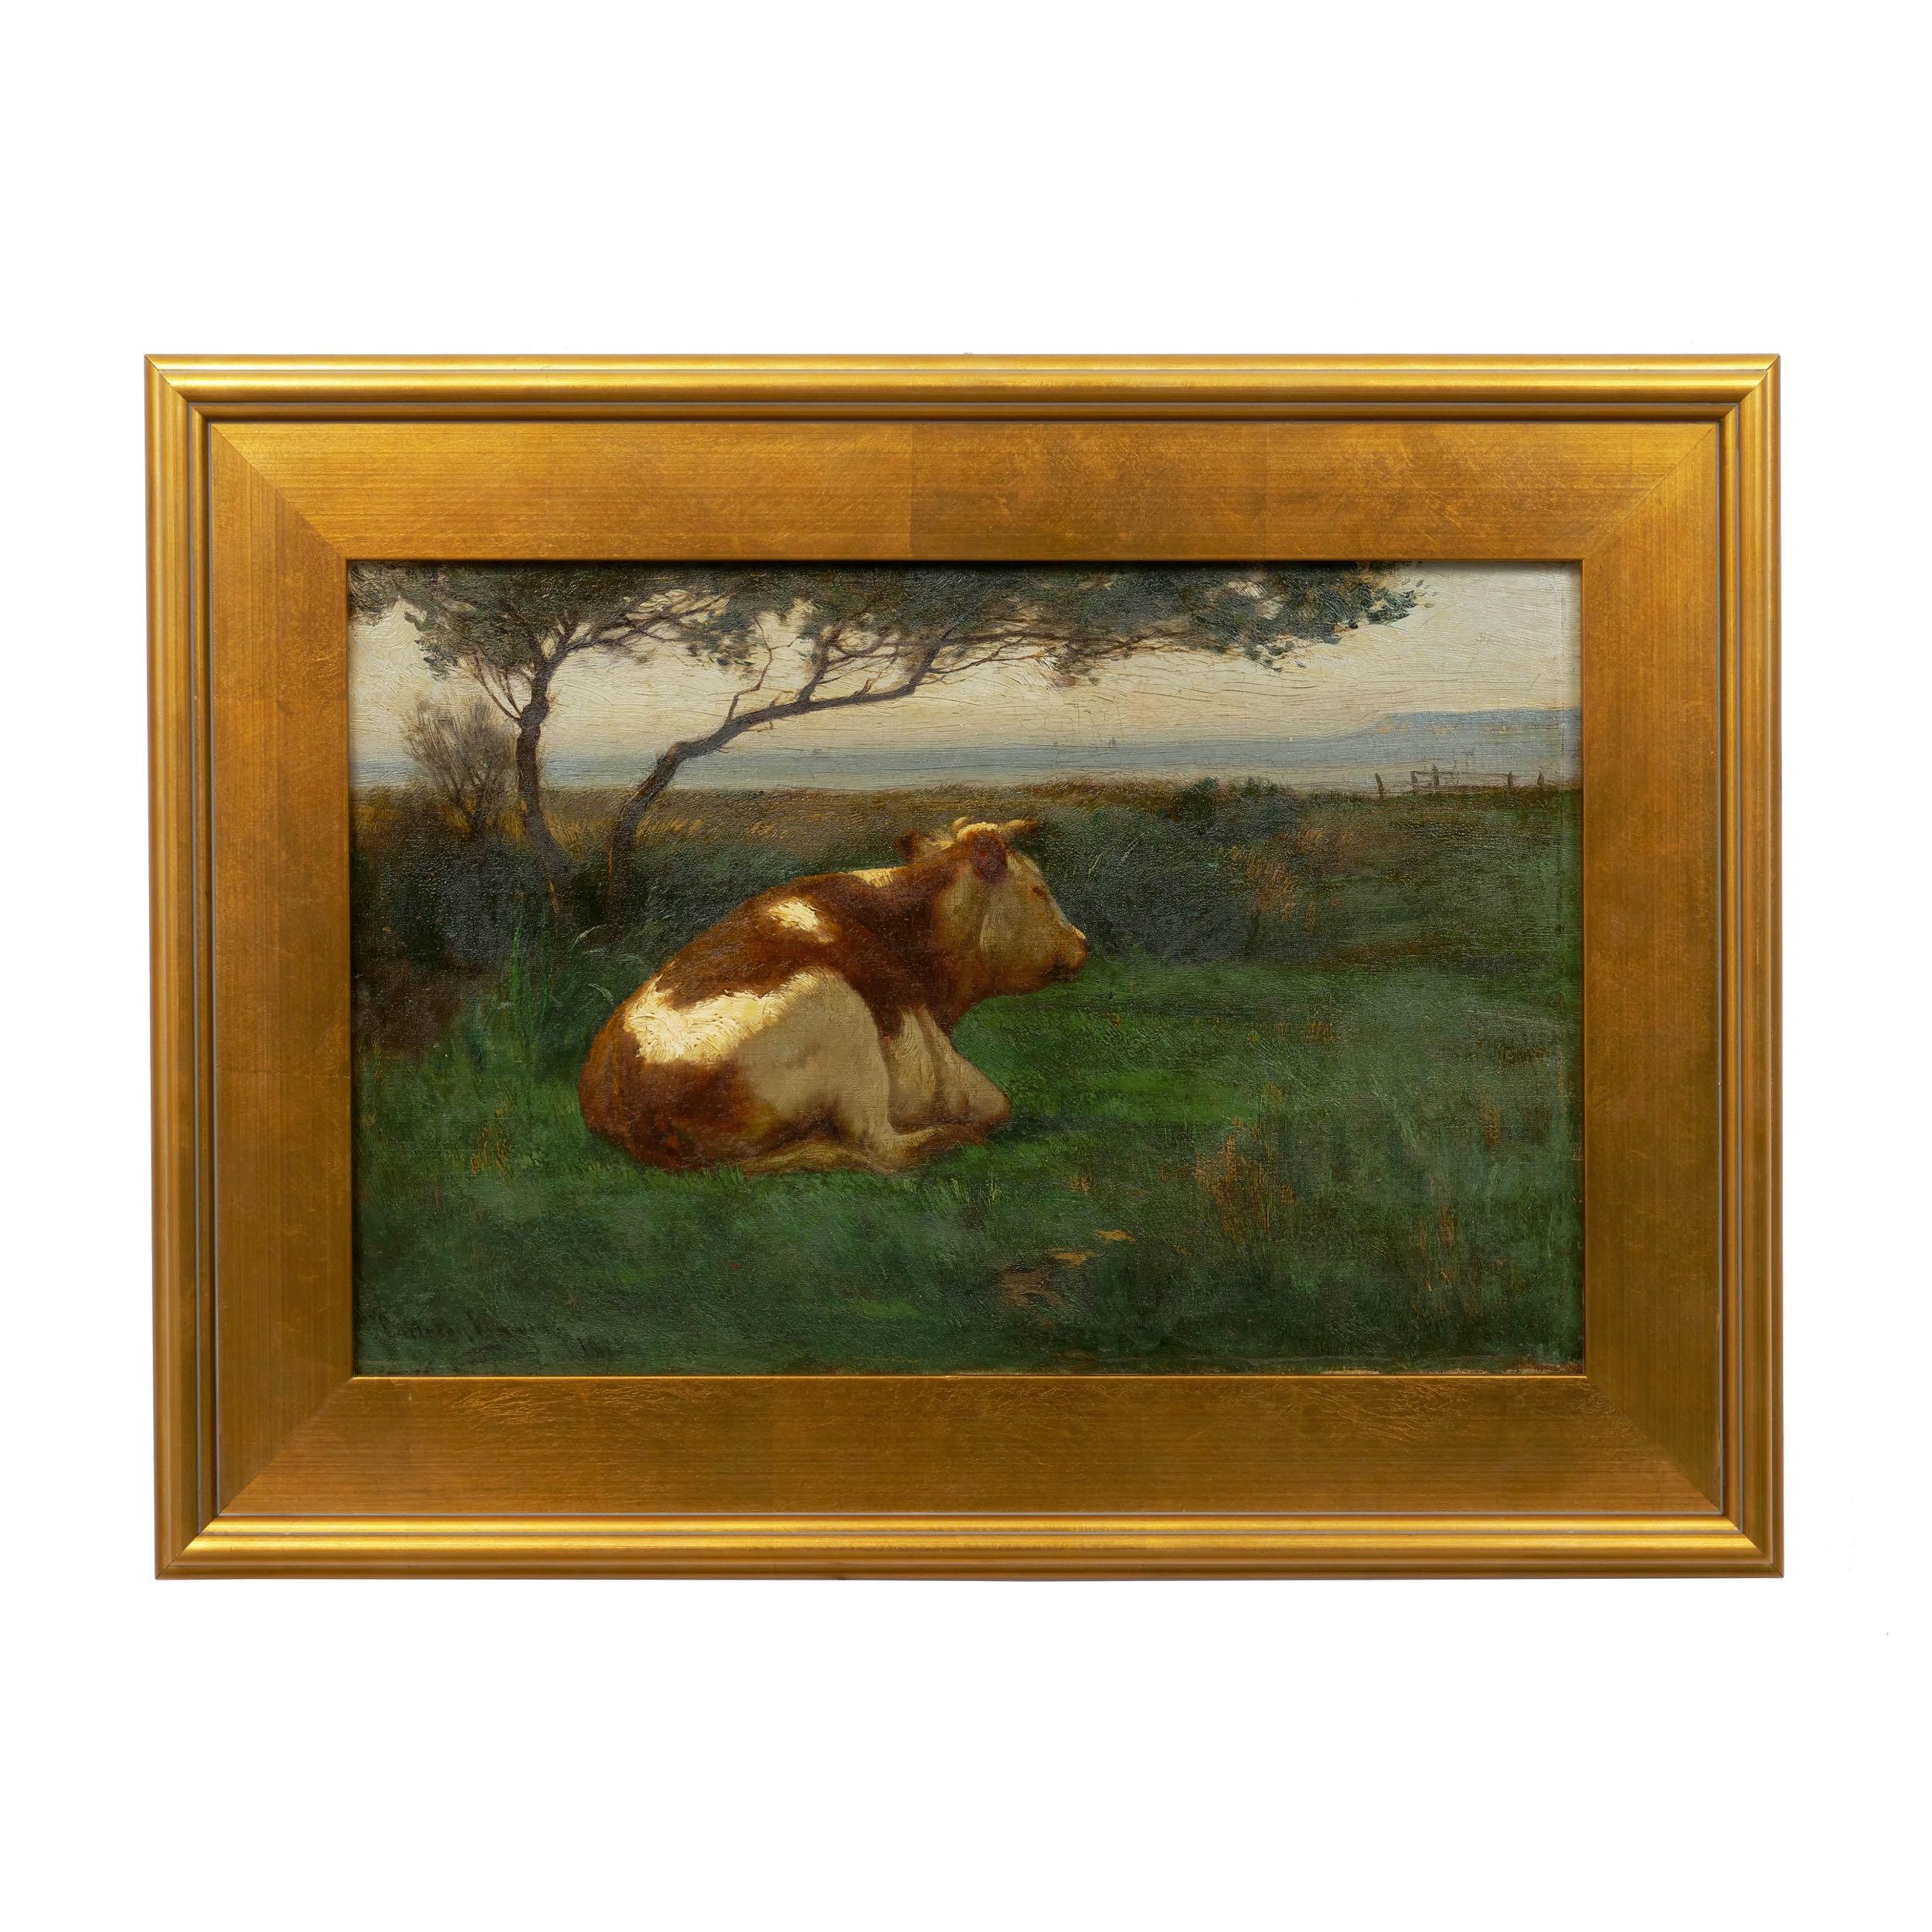 A fine tonalist painting depicting a resting bull in a pastoral landscape overlooking a quiet horizon beneath a large tree. The lighting of the subject is interesting in how the bull is brilliant and the surrounding light fades away into the dark